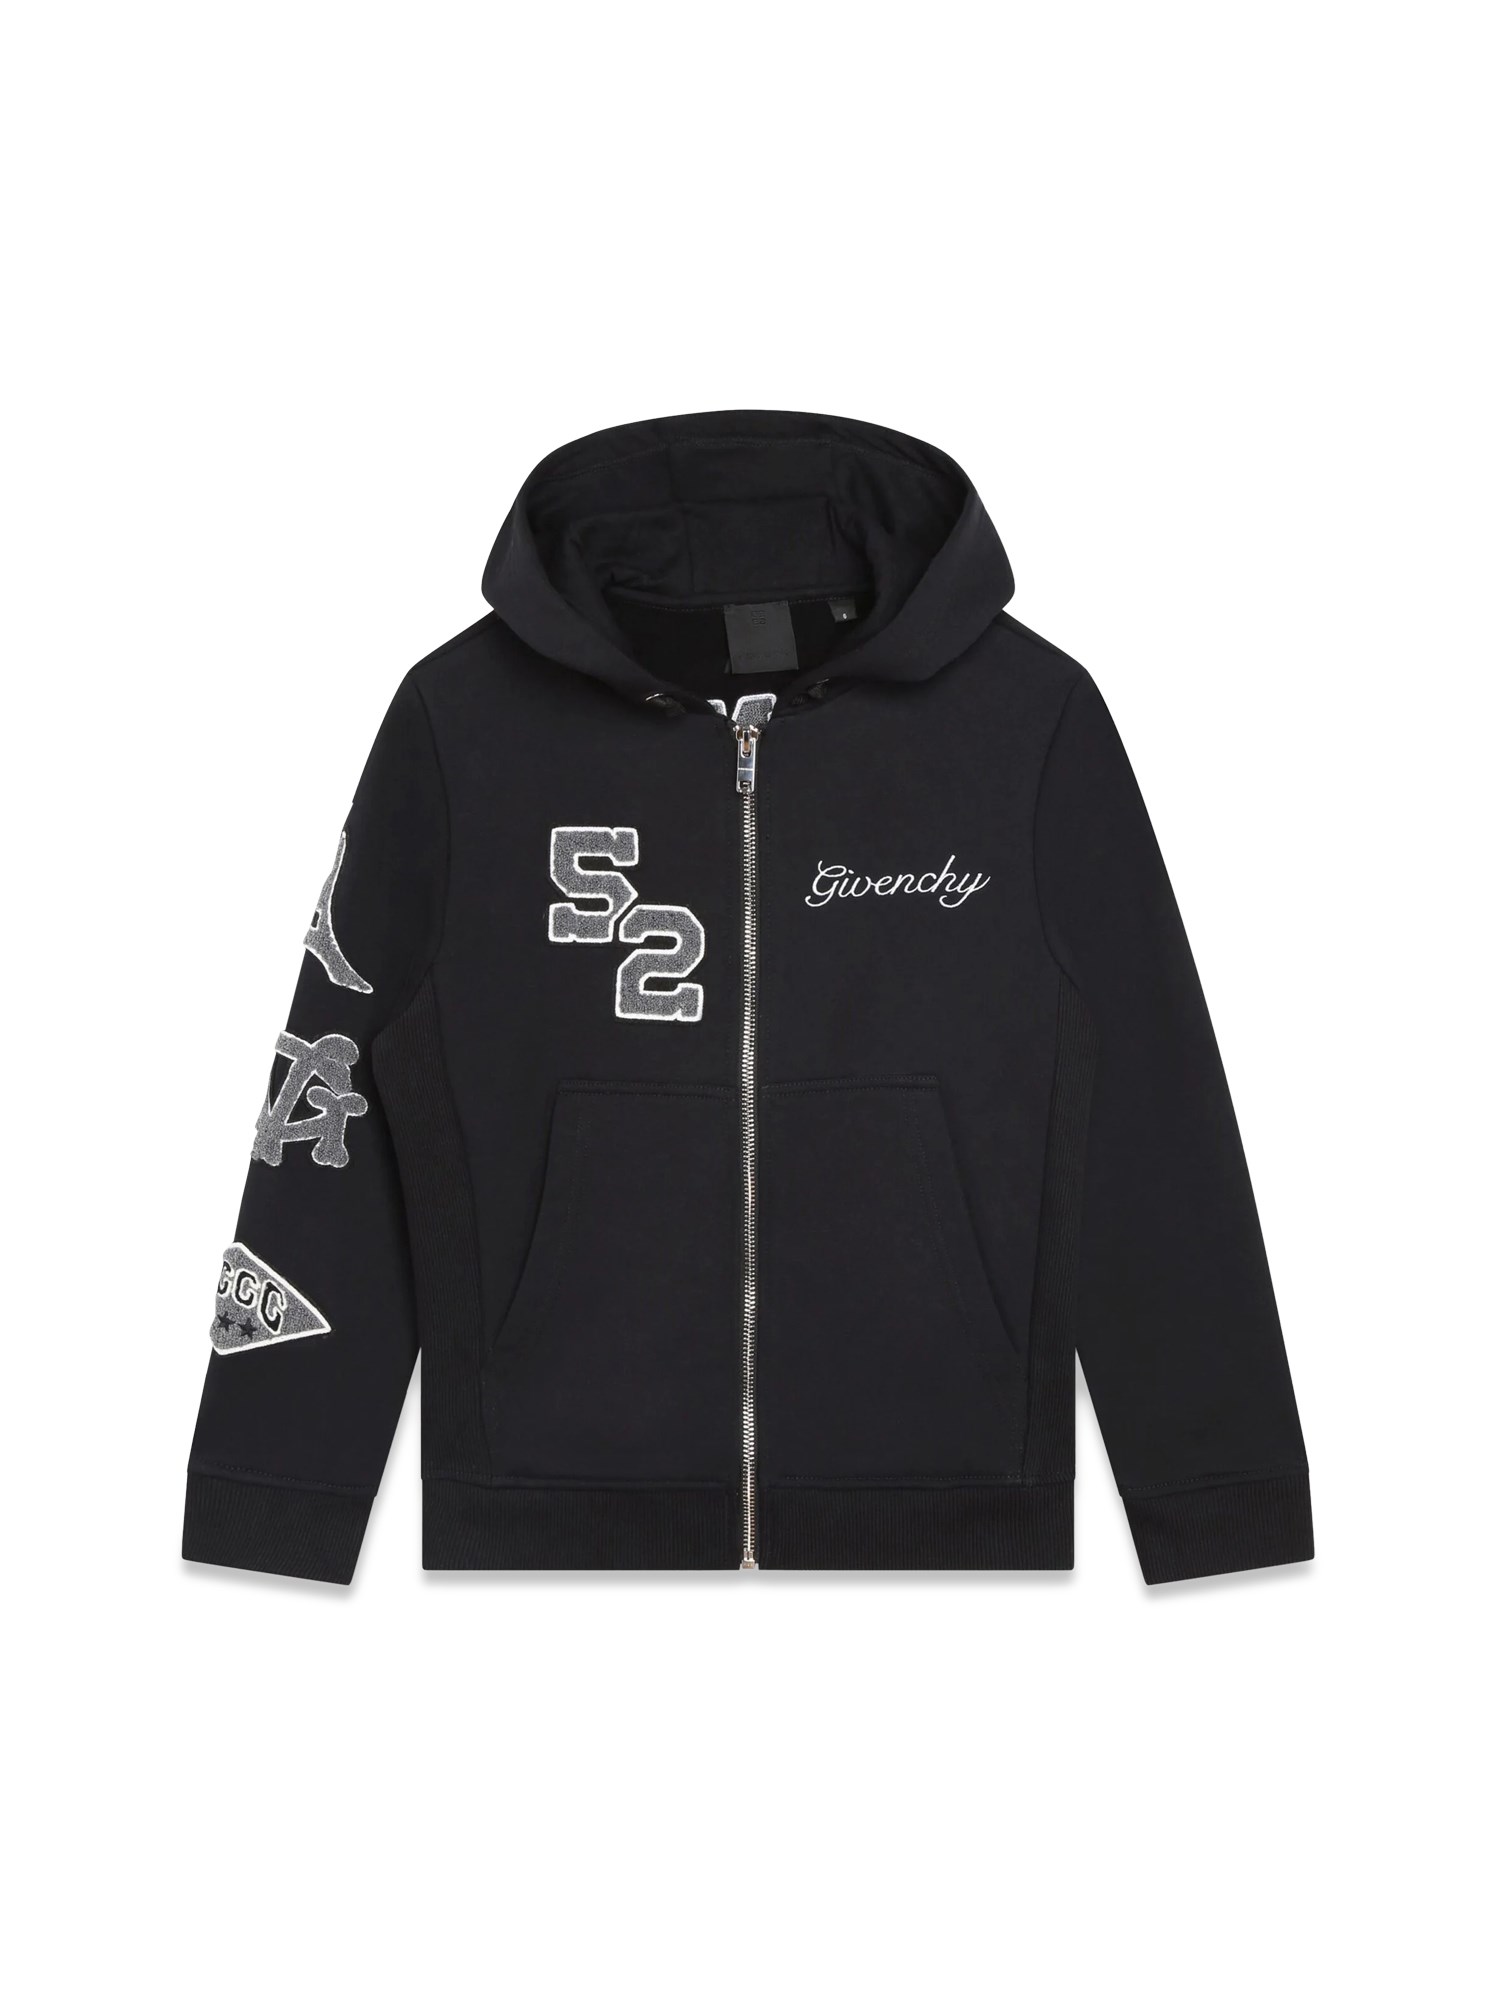 givenchy zipper hoodie